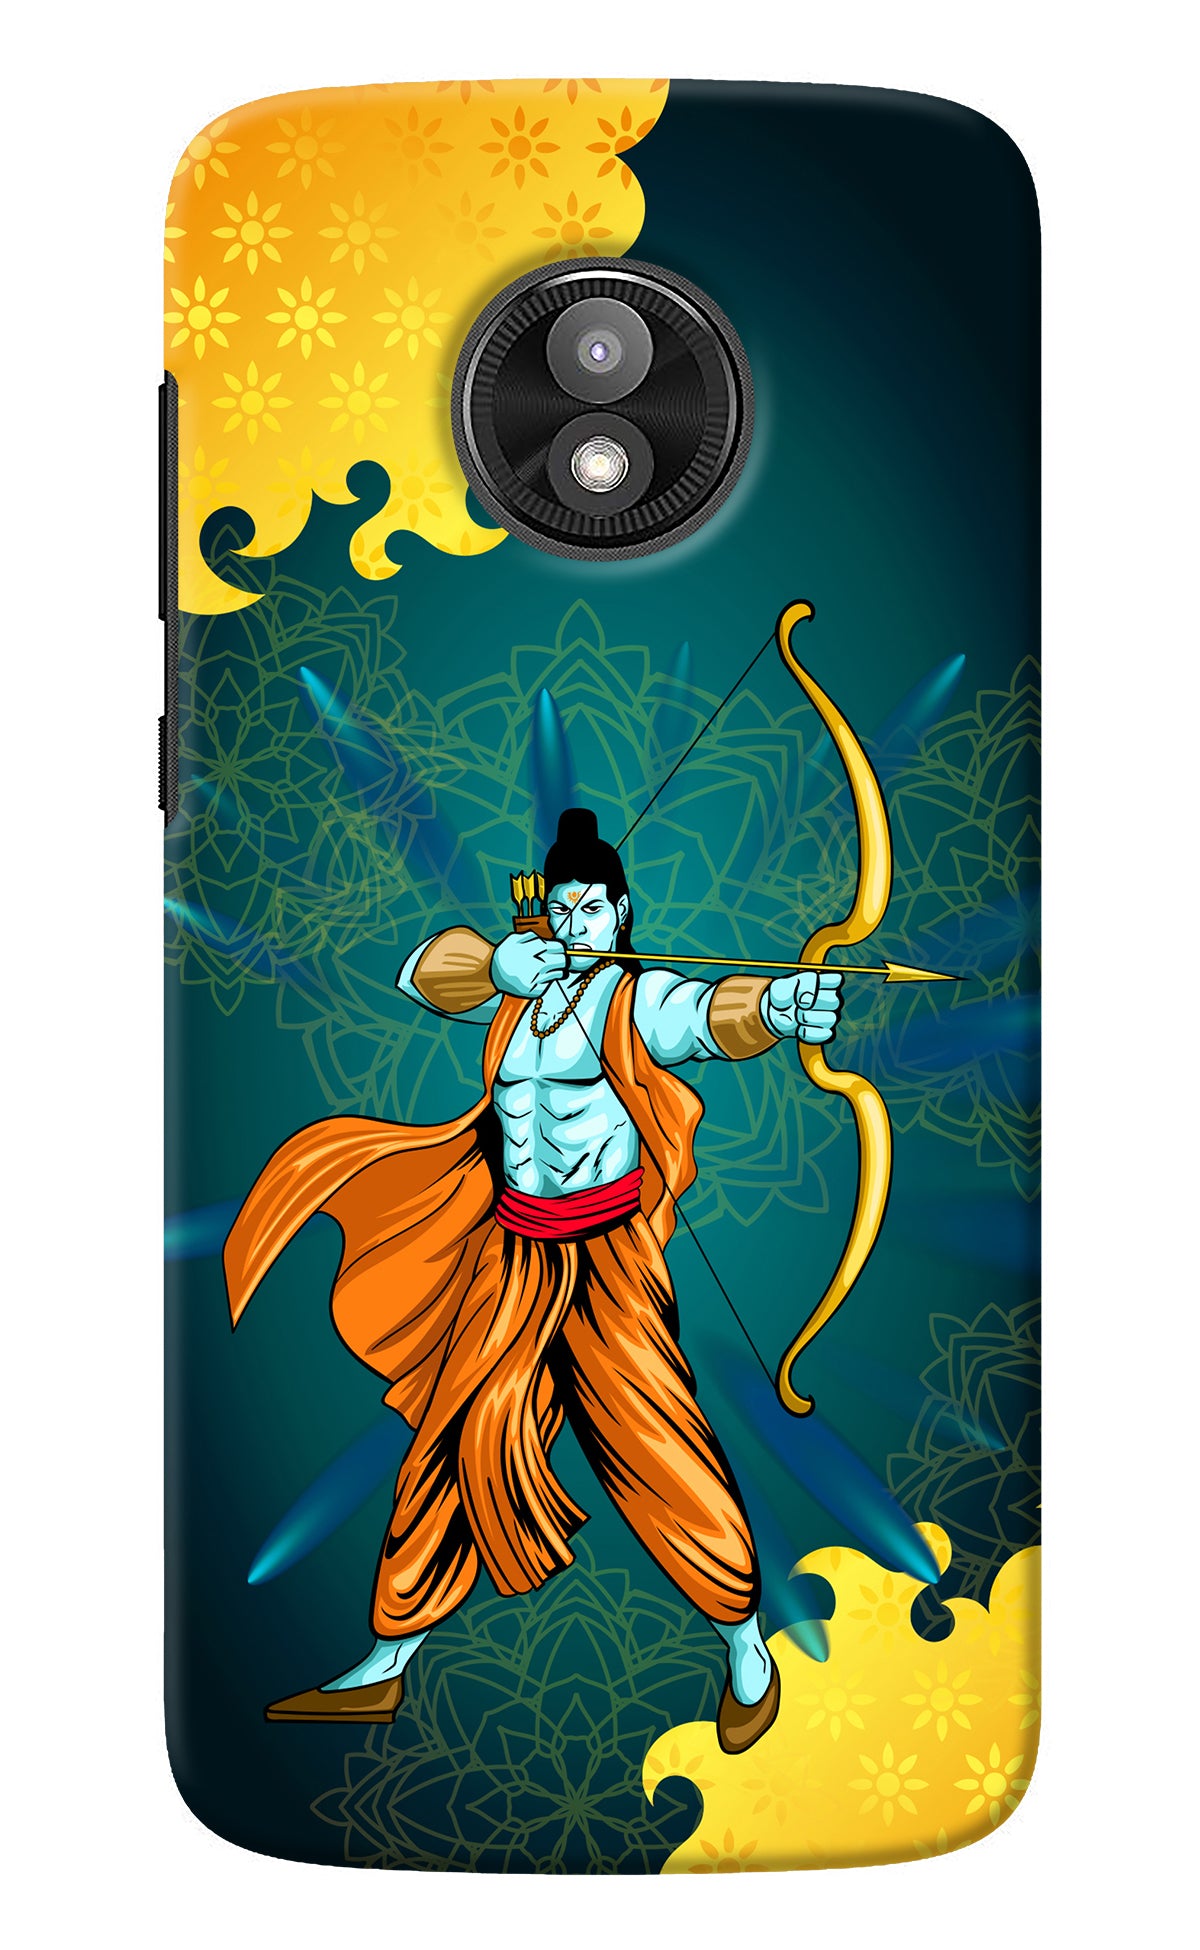 Lord Ram - 6 Moto E5 Play Back Cover